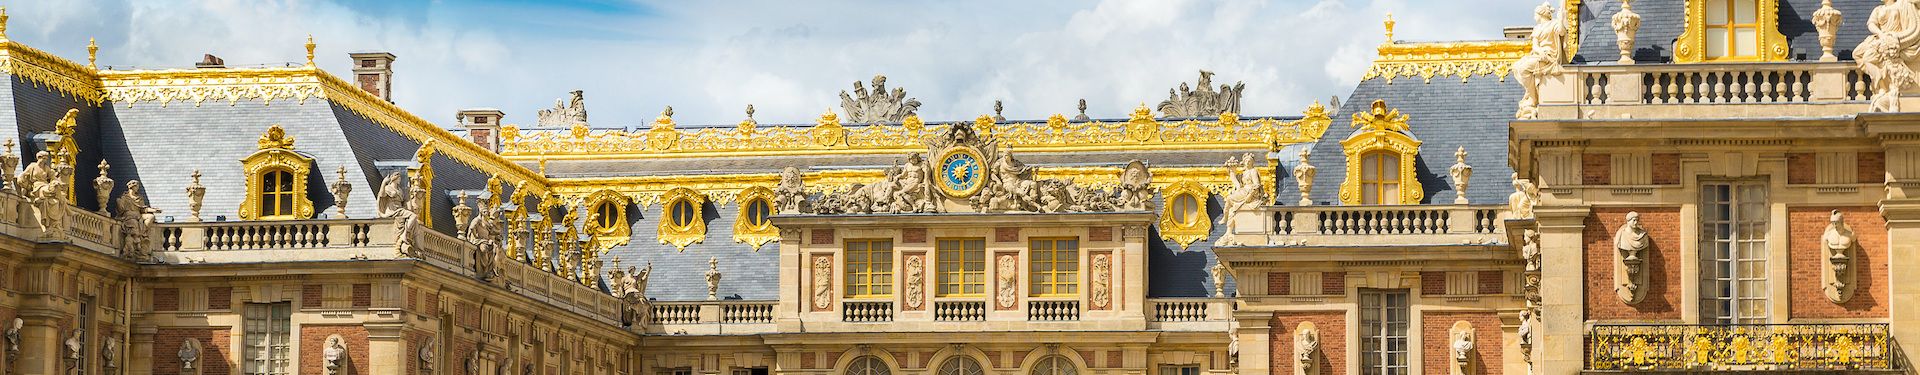 Europes Top attractions Versailles